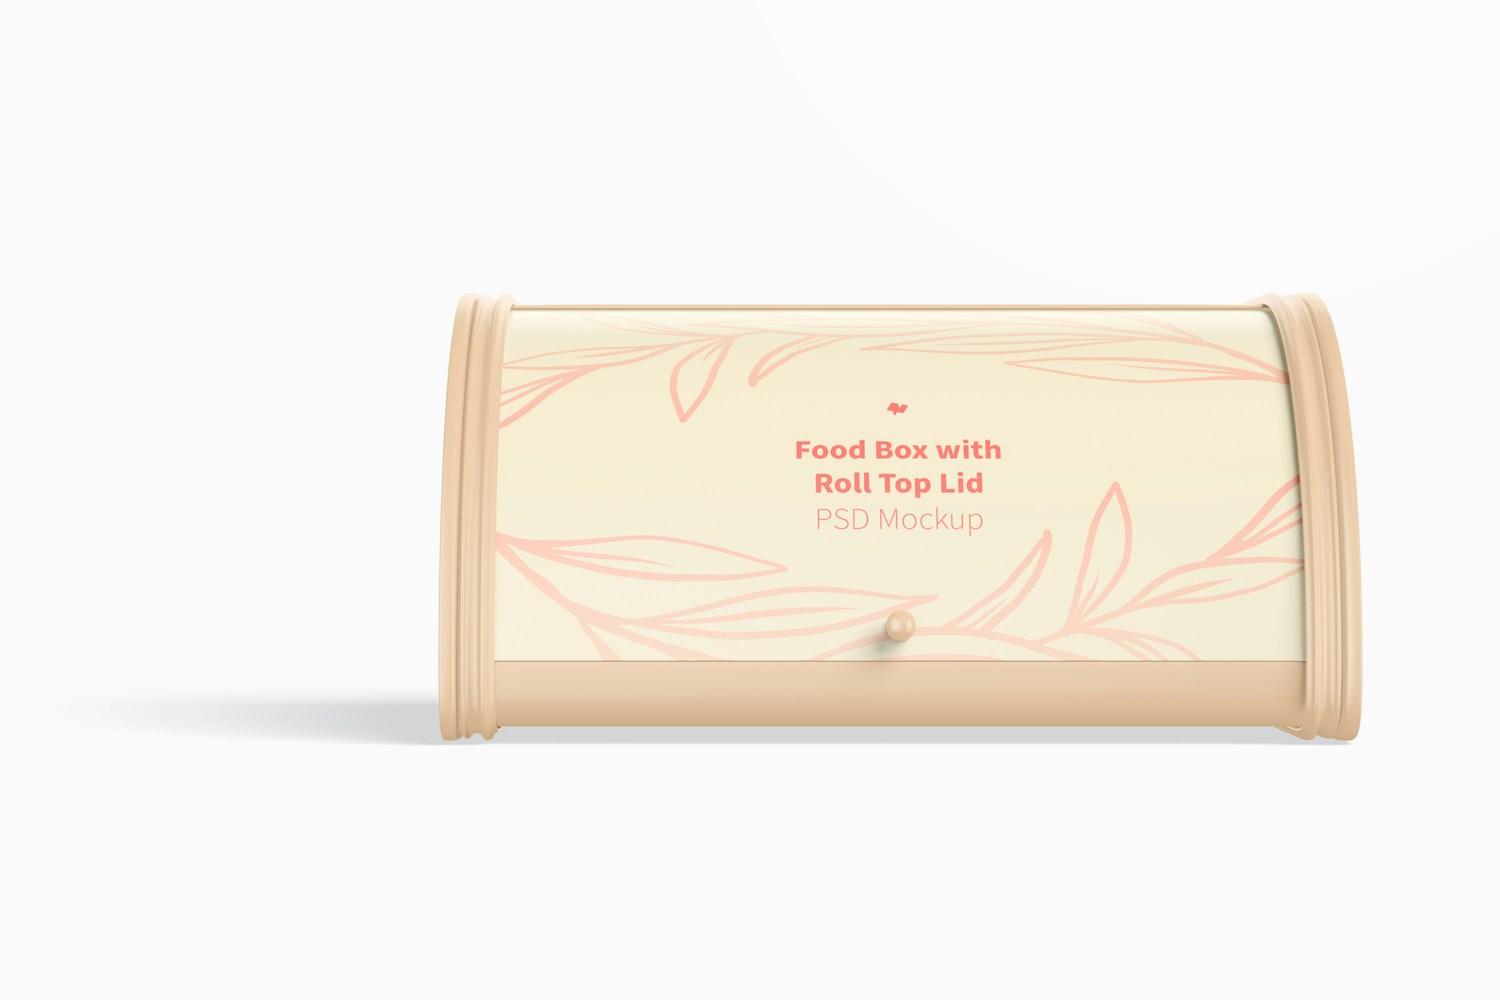 Food Box with Roll Top Lid Mockup